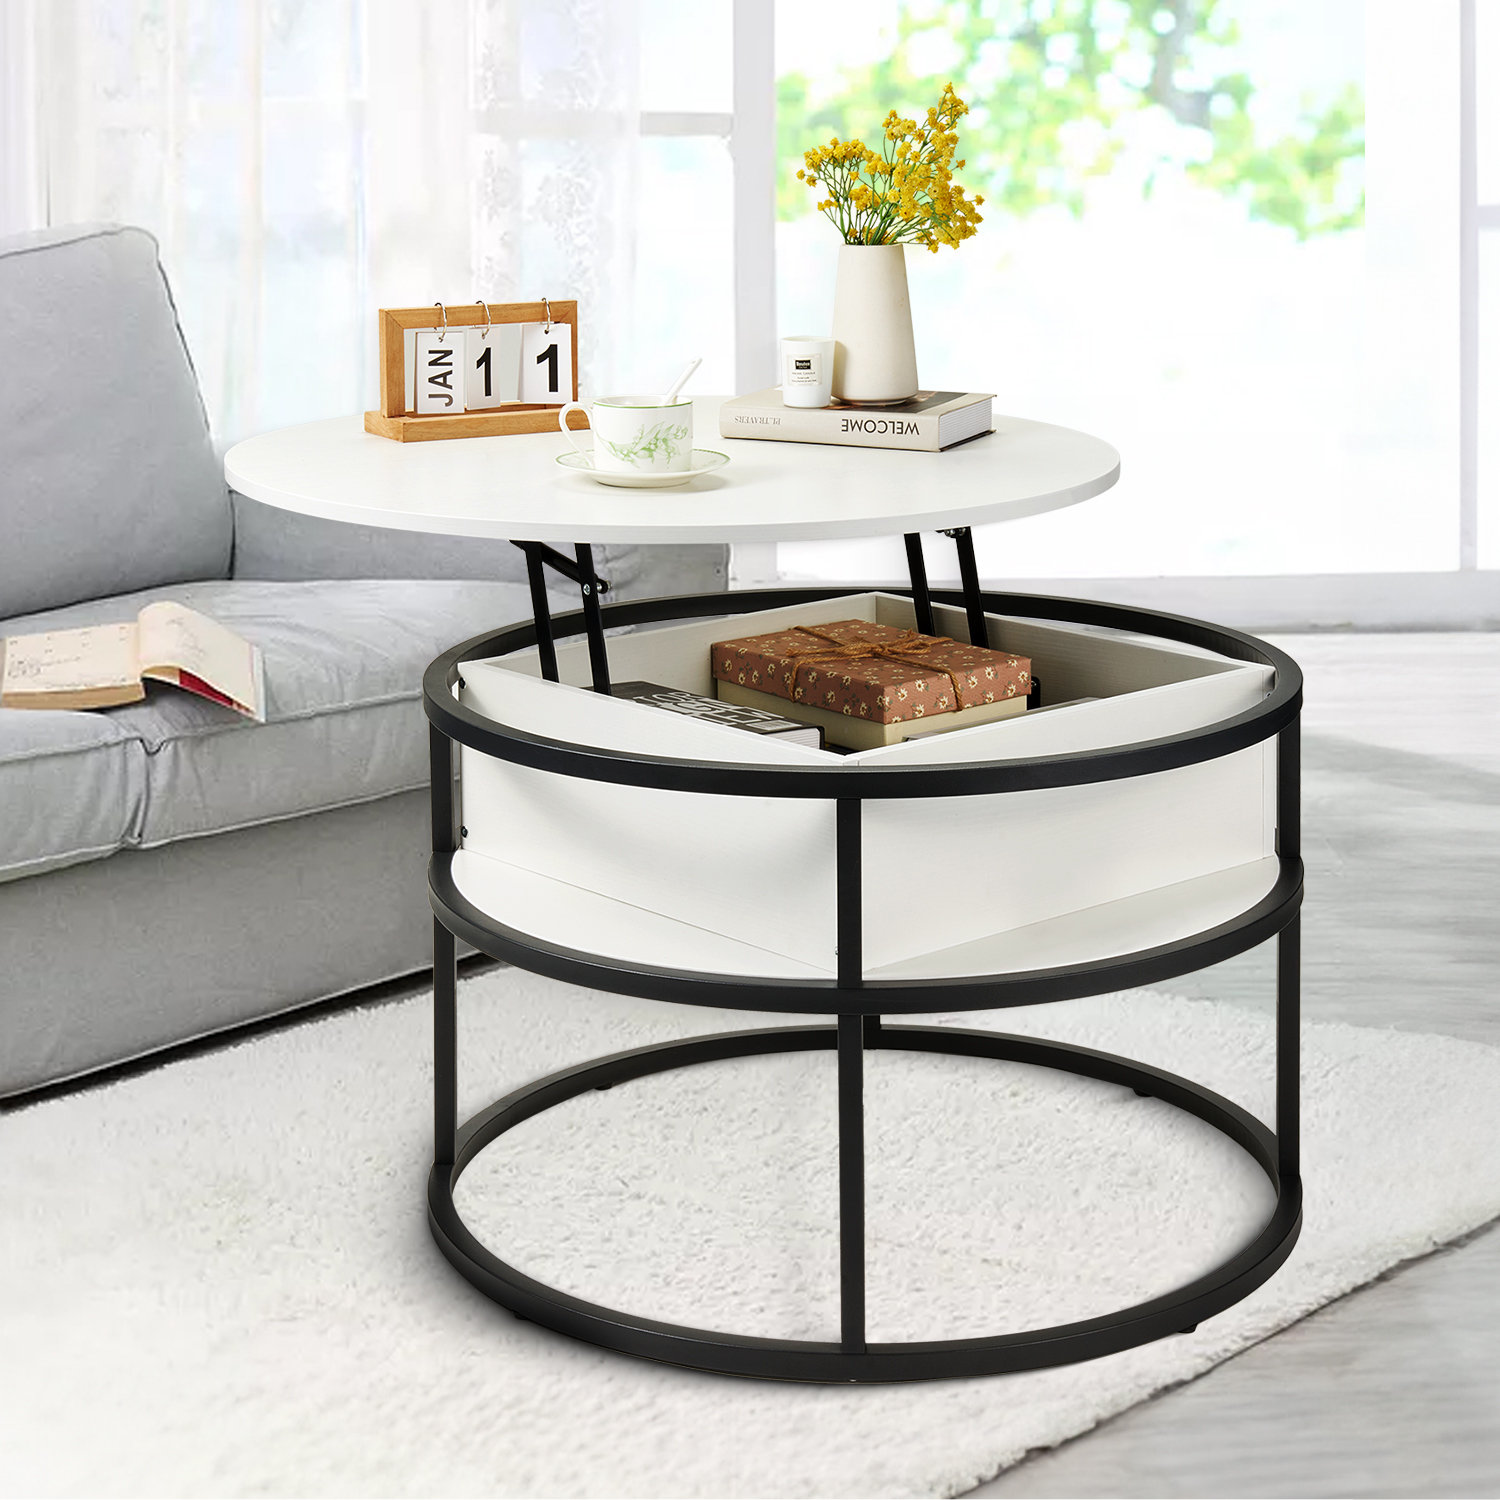 Hasita Lift Top & Slide Out Coffee Table with Storage George Oliver Table Base Color: Black, Table Top Color: White